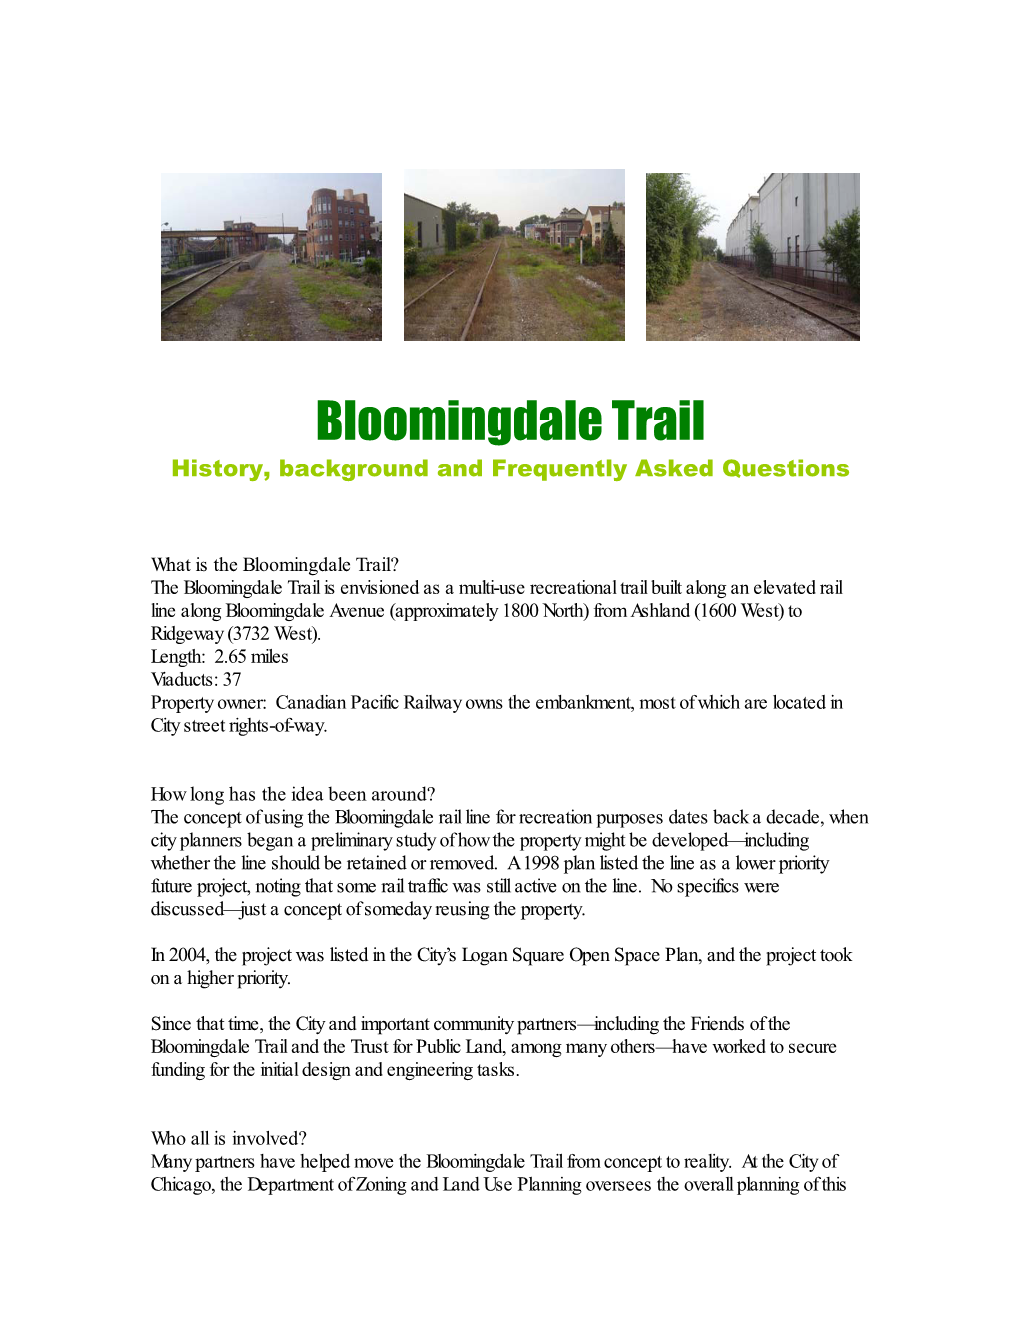 Bloomingdale Trail History, Background and Frequently Asked Questions